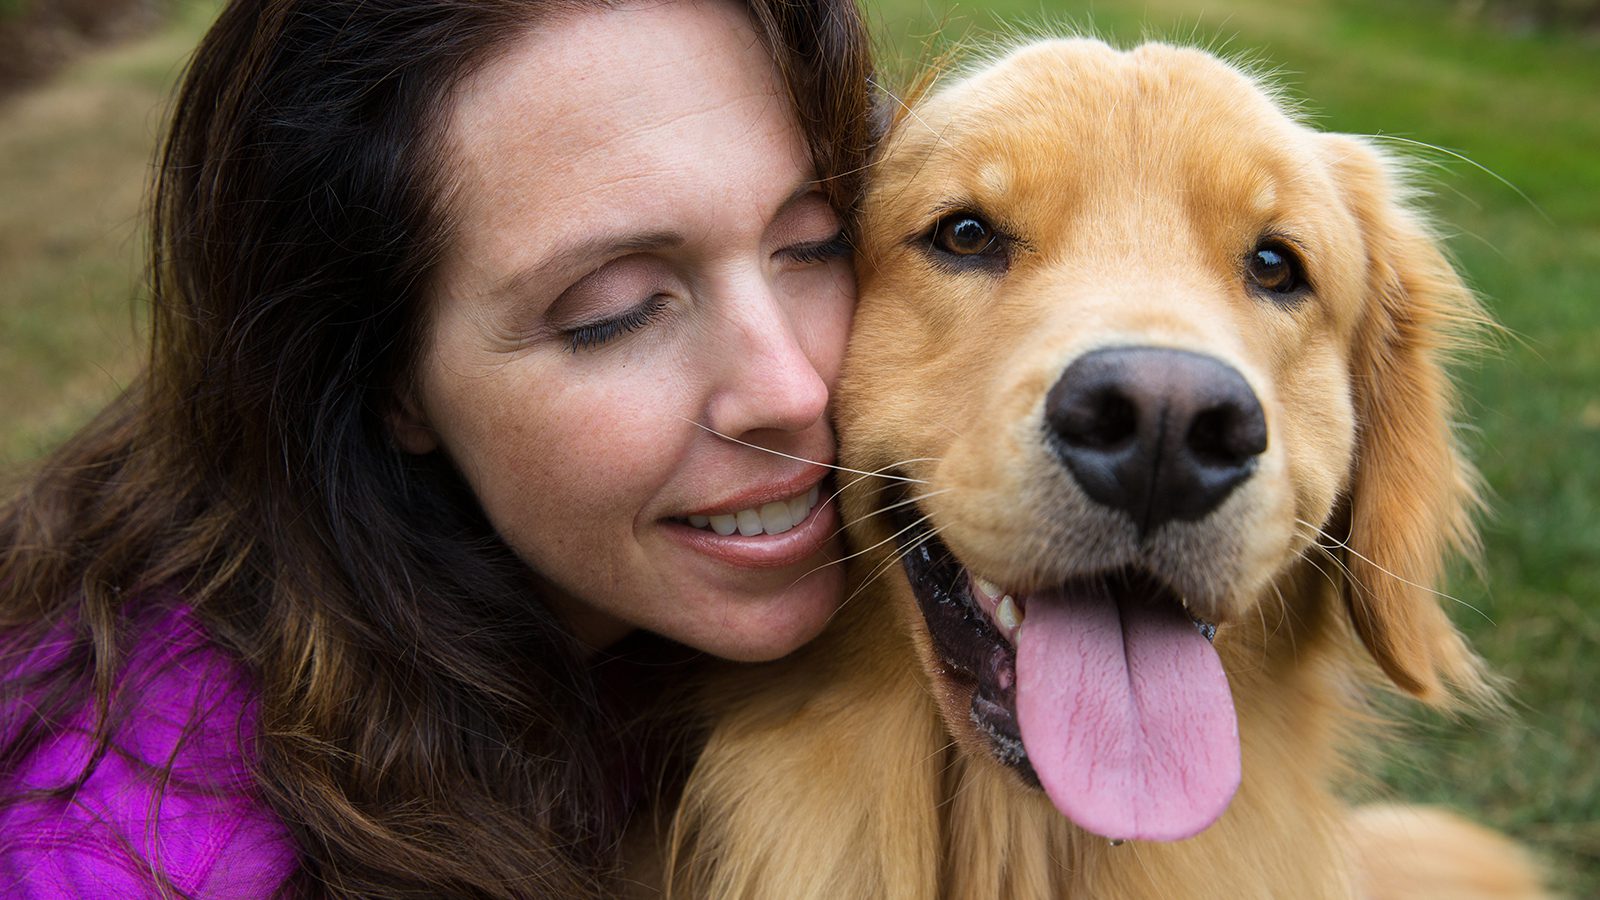 Psychologists Explain Why We Love Dogs So Much